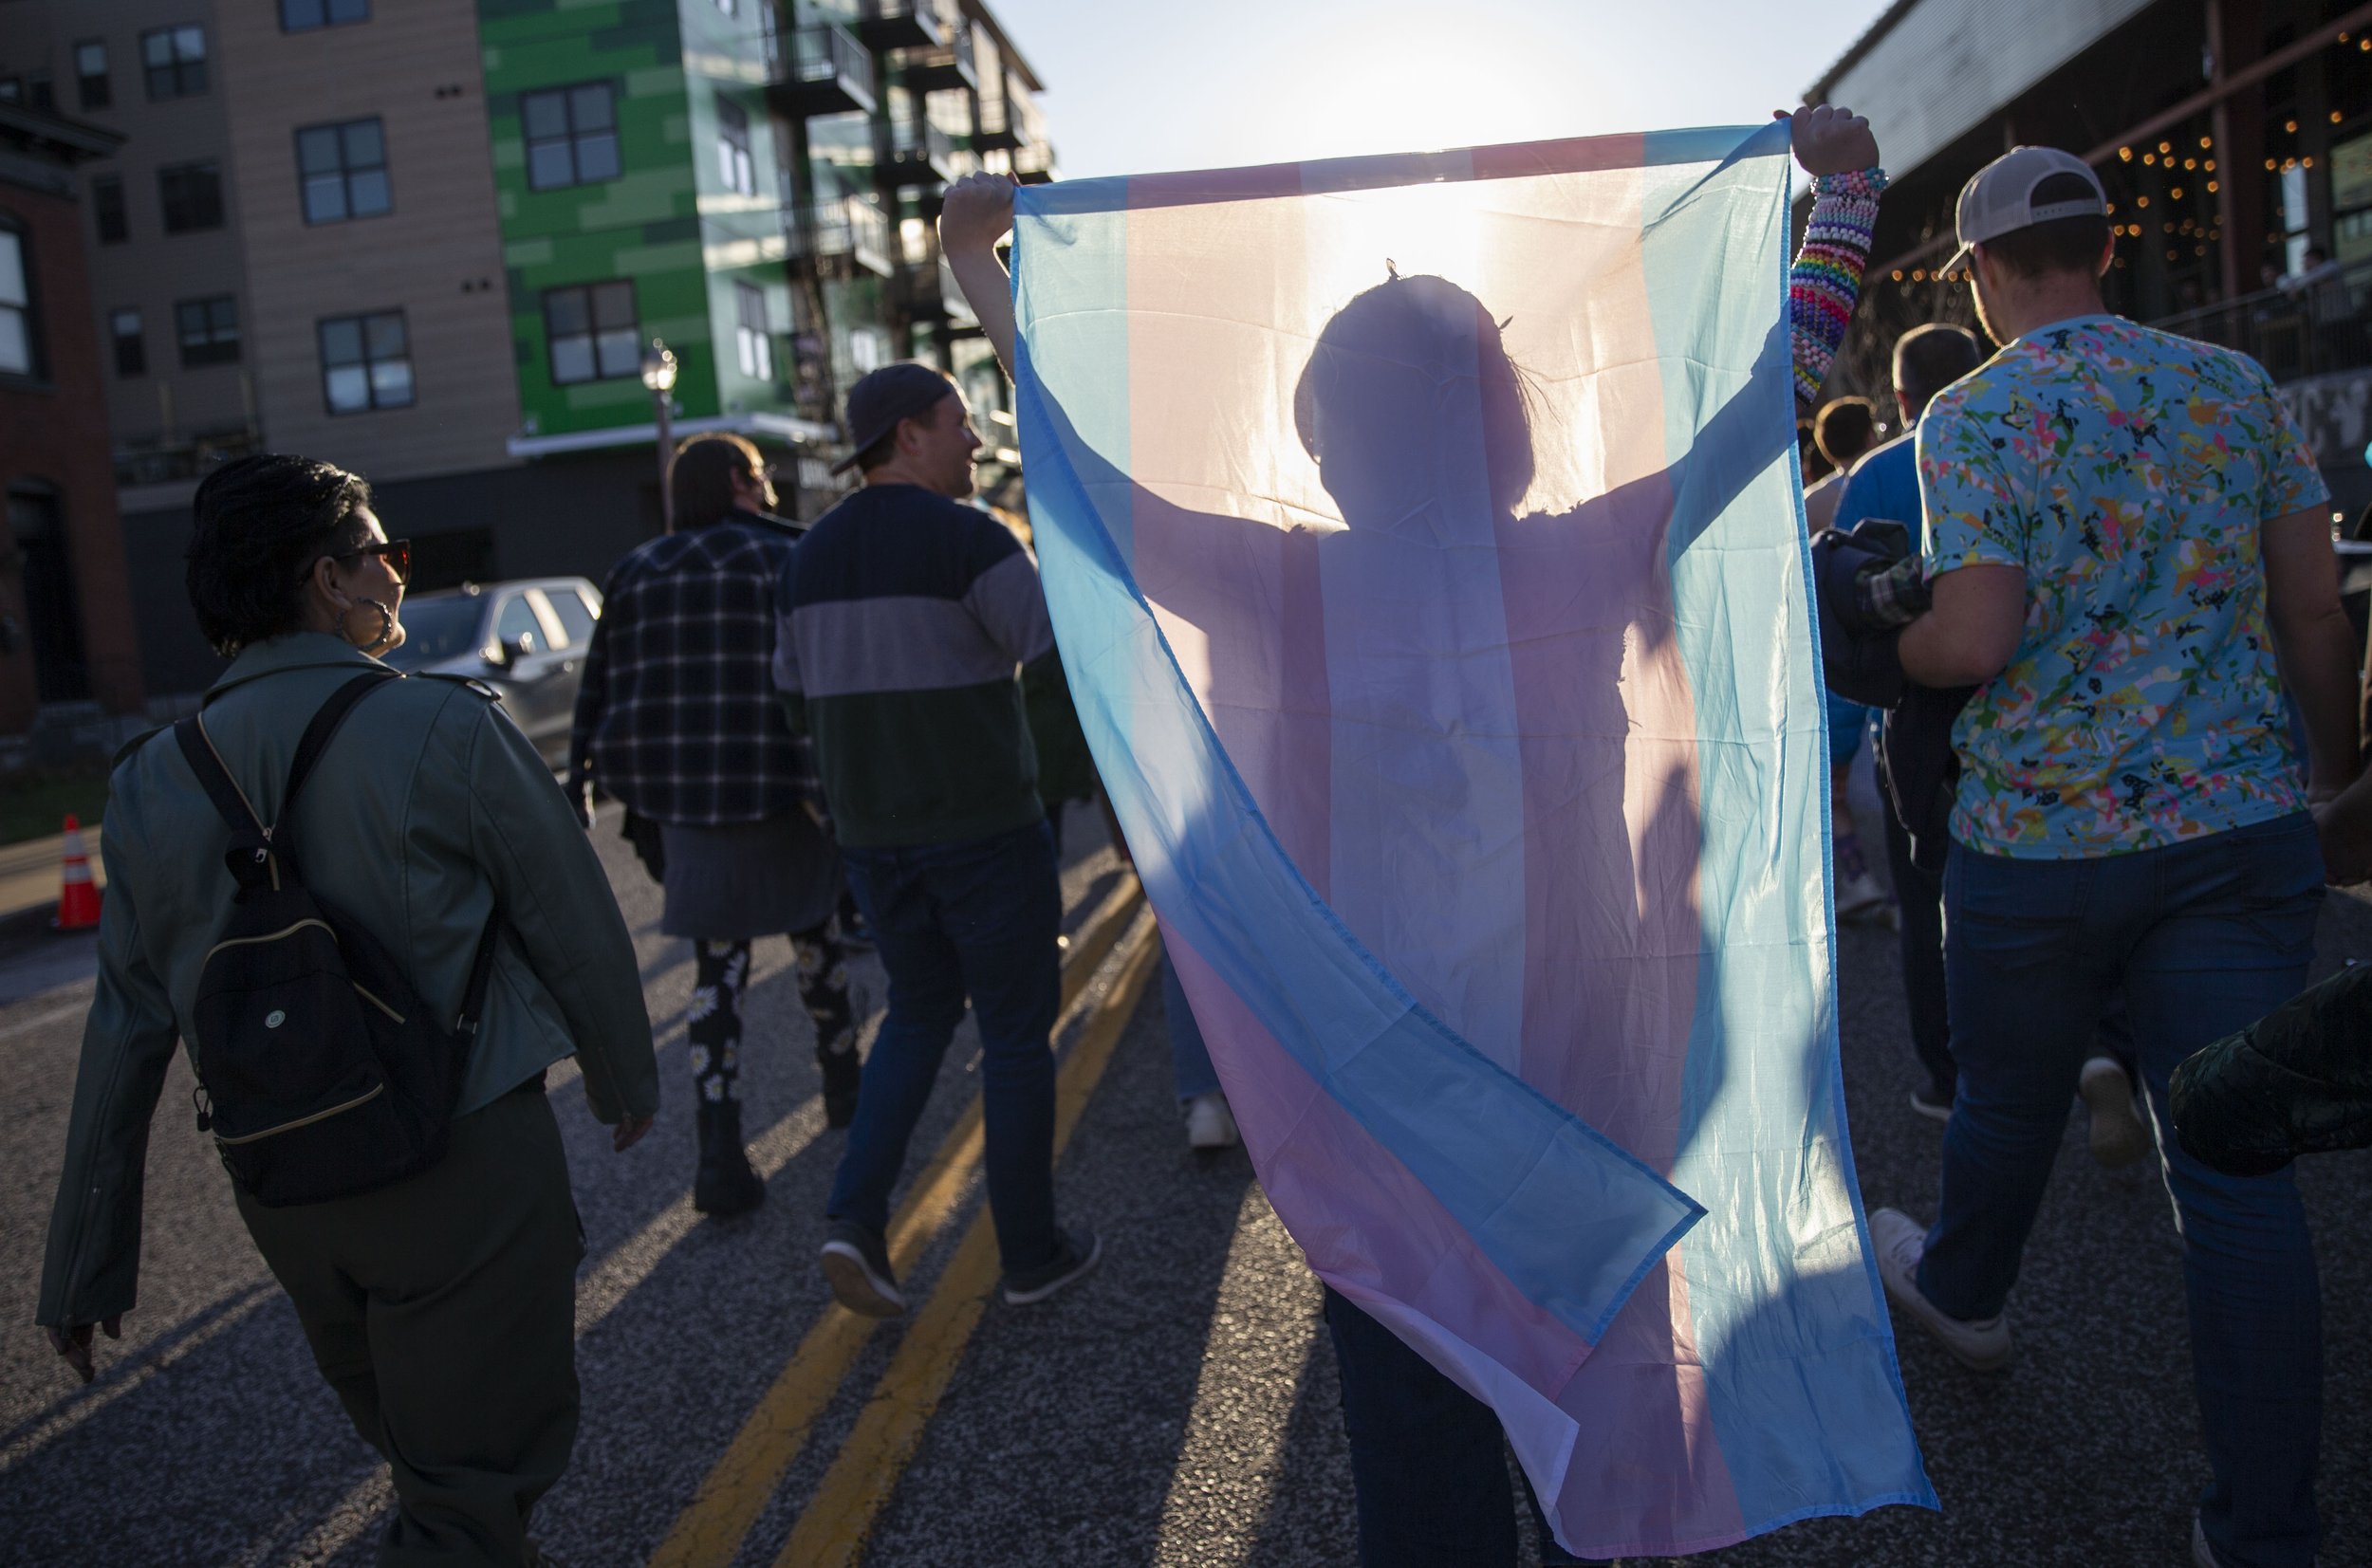  An activist carries a transgender flag during a solidarity march Saturday, March 25, 2023, along Manchester Avenue in the Grove neighborhood. Activists, organized by group “It's all drag!,” marched in response to nationwide legislation, including dr